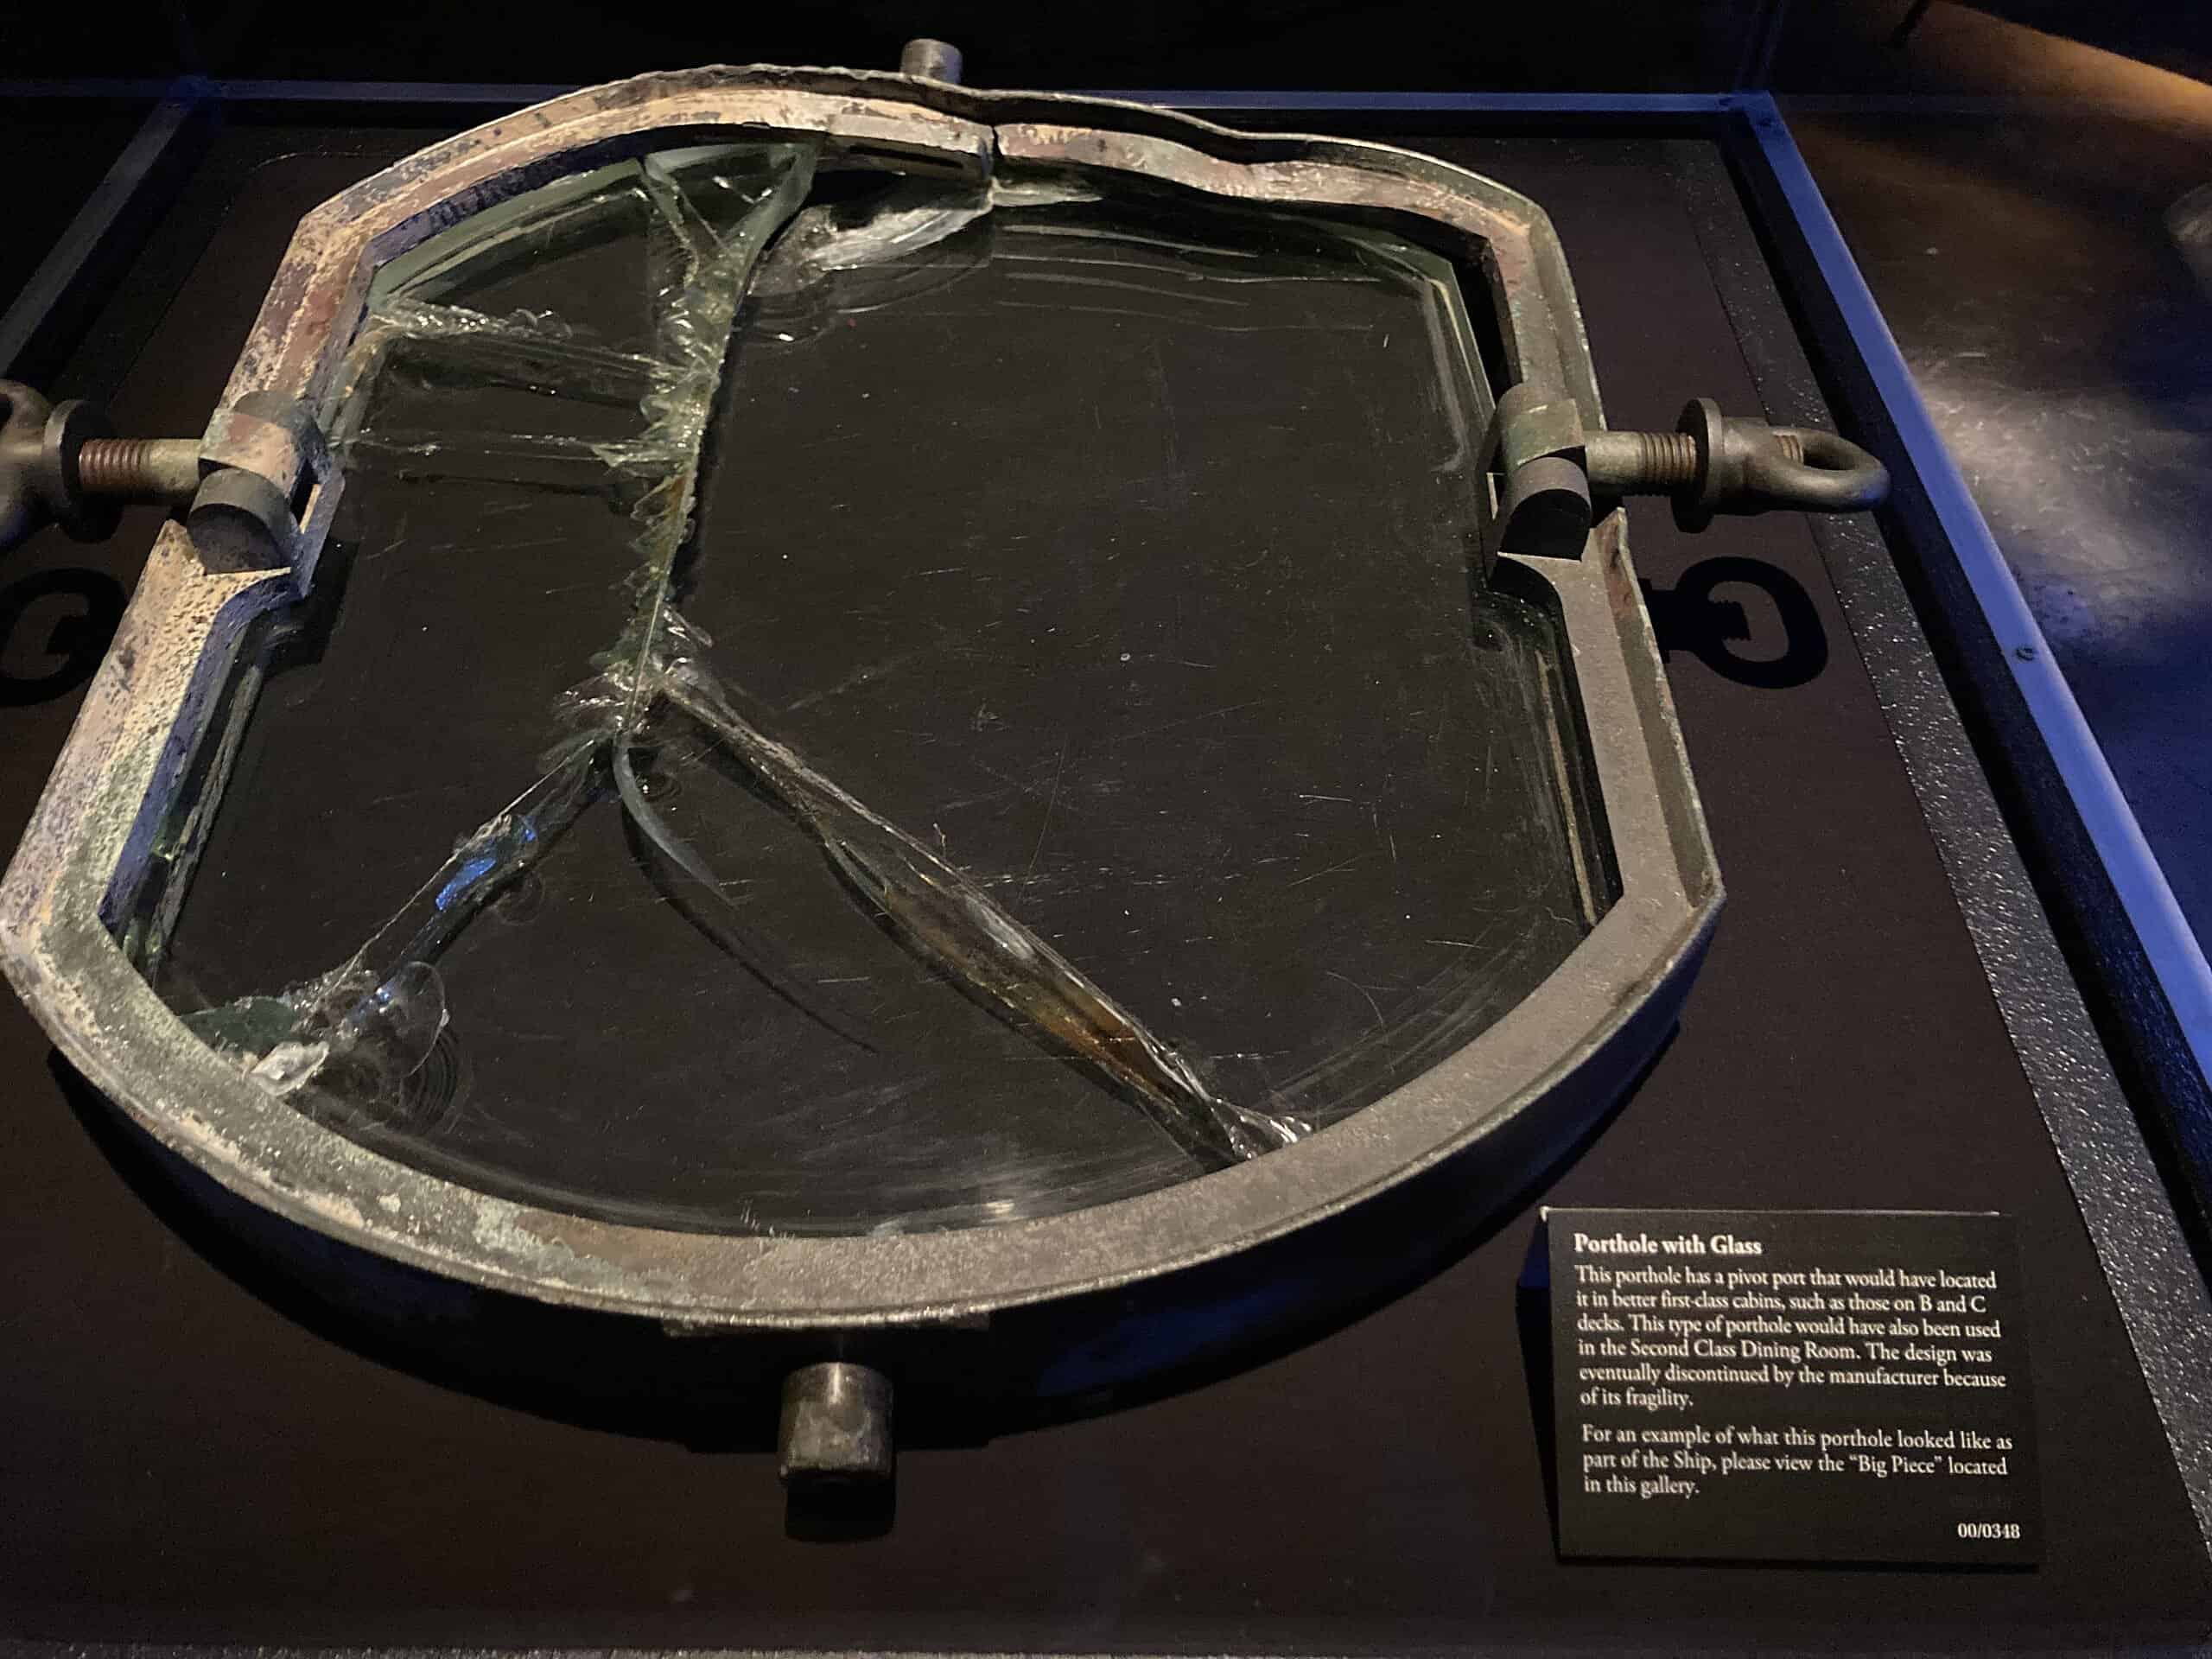 <p>Among the incredible finds that have been recovered from the Titanic’s wreckage is this first-class porthole. As the sign indicates, this porthole could have been used in the second-class dining room. You can see the multiple cracks that have occurred due to the pressure at the bottom of the ocean. </p><p><span>Would you please let us know what you think about our content? <p>Agree? Tell us by clicking the “Thumbs Up” button above.</p> Disagree? Leave a comment telling us what you’d change.</span></p>